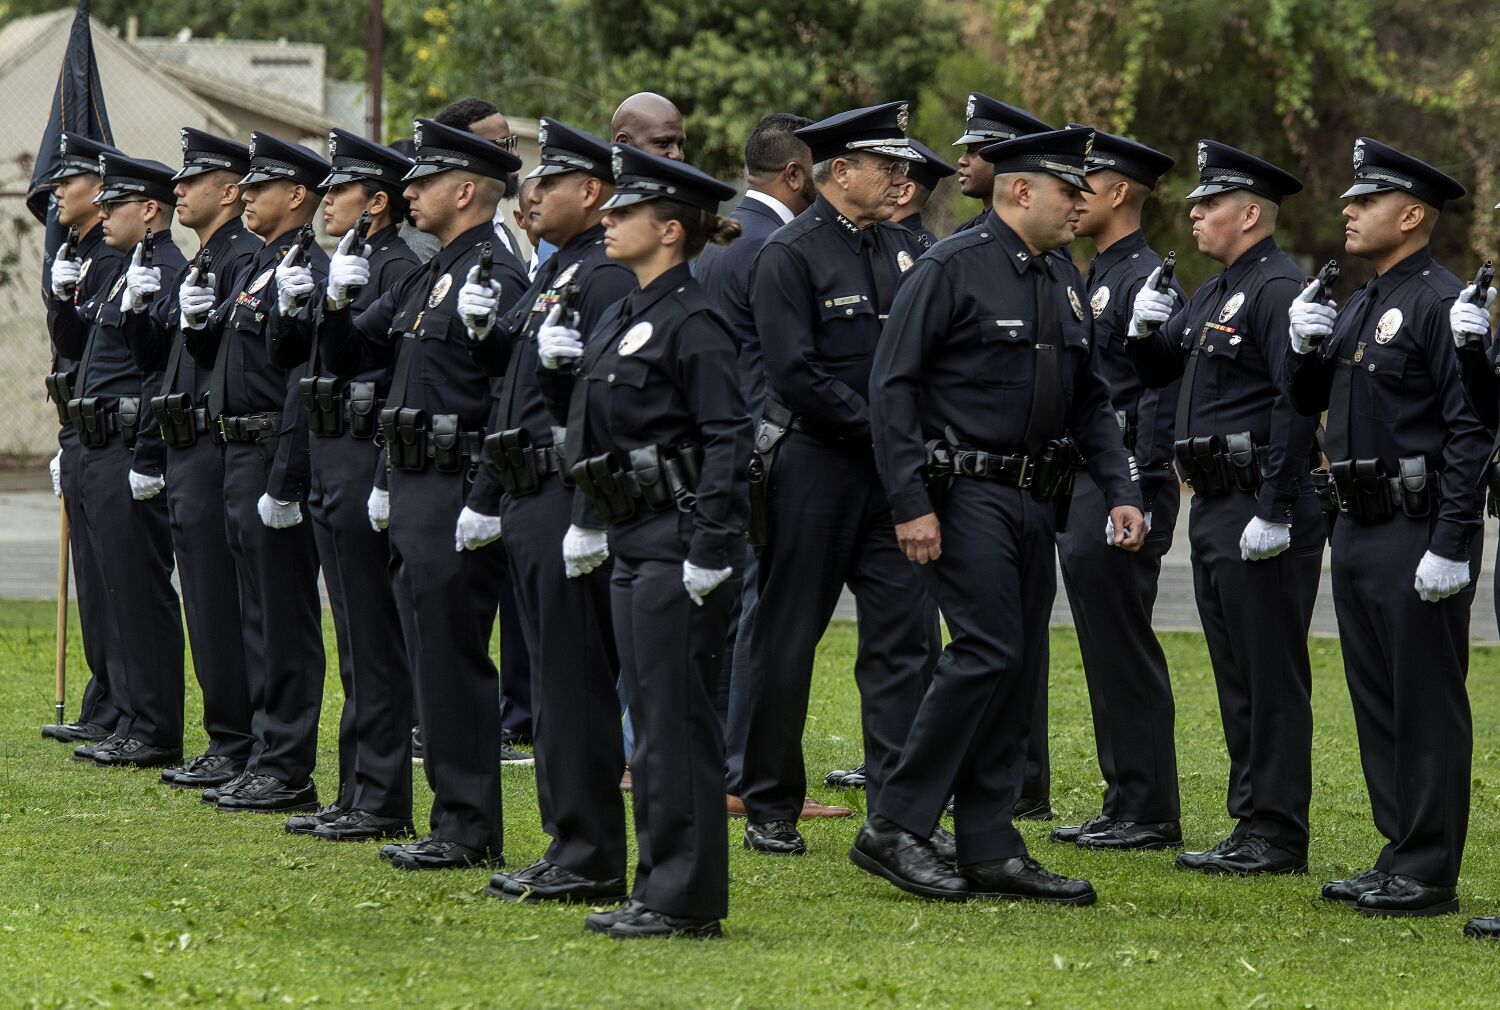 Top L.A. police union official tells cops to go 'somewhere that understands your worth'